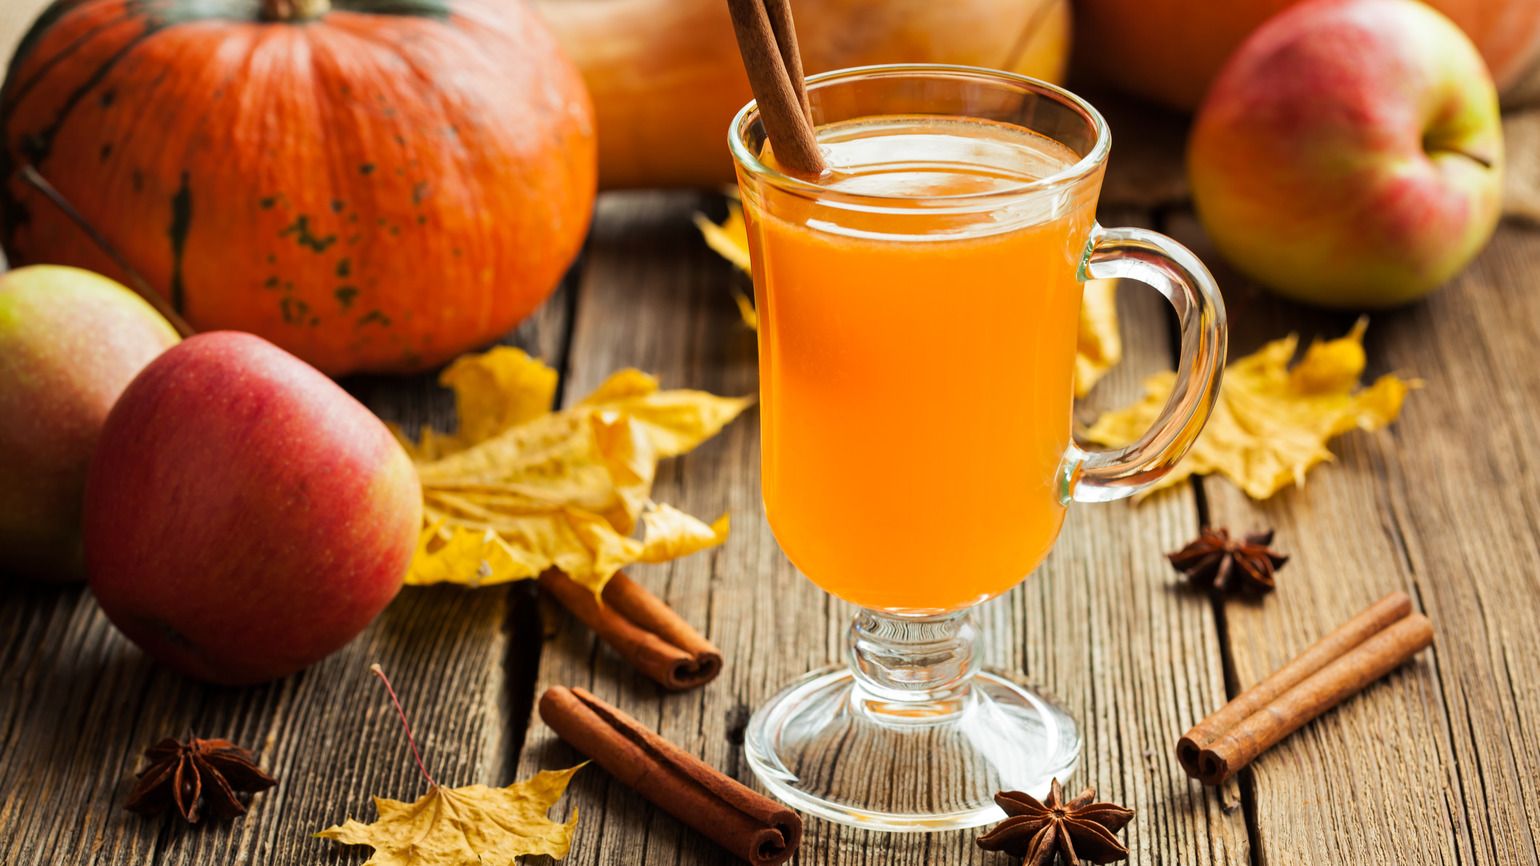 Hot apple cider healthy traditional winter Christmas or thanksgiving holiday (Getty)